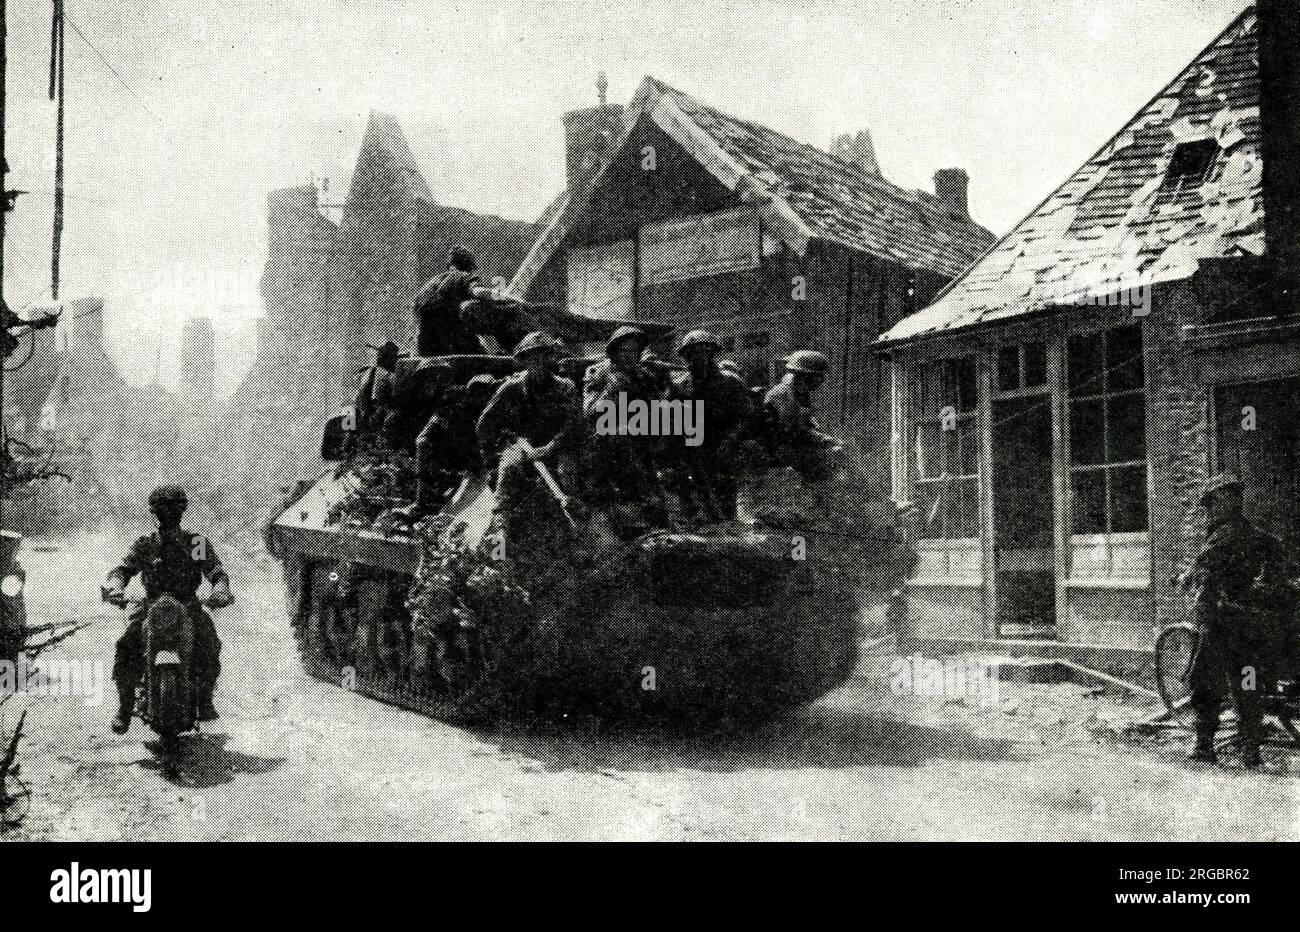 Allied forces cross frontier into Belgium, 2 September 1944, WW2 - a tank loaded with soldiers passes through a town. Stock Photo